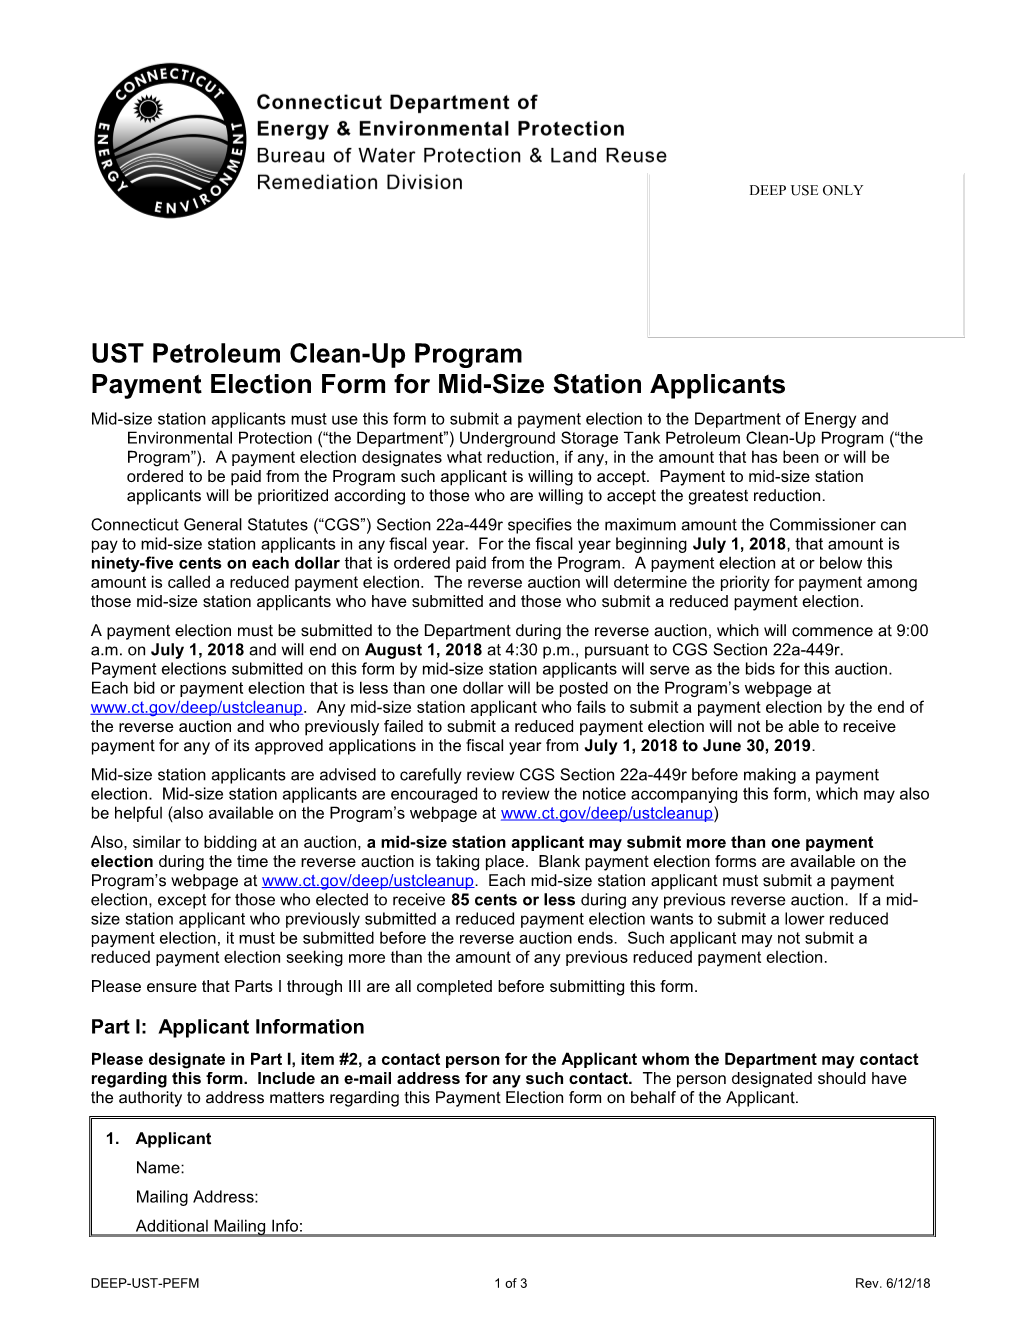 UST Petroleum Clean-Up Program Payment Election Form for Mid Size Station Applicants